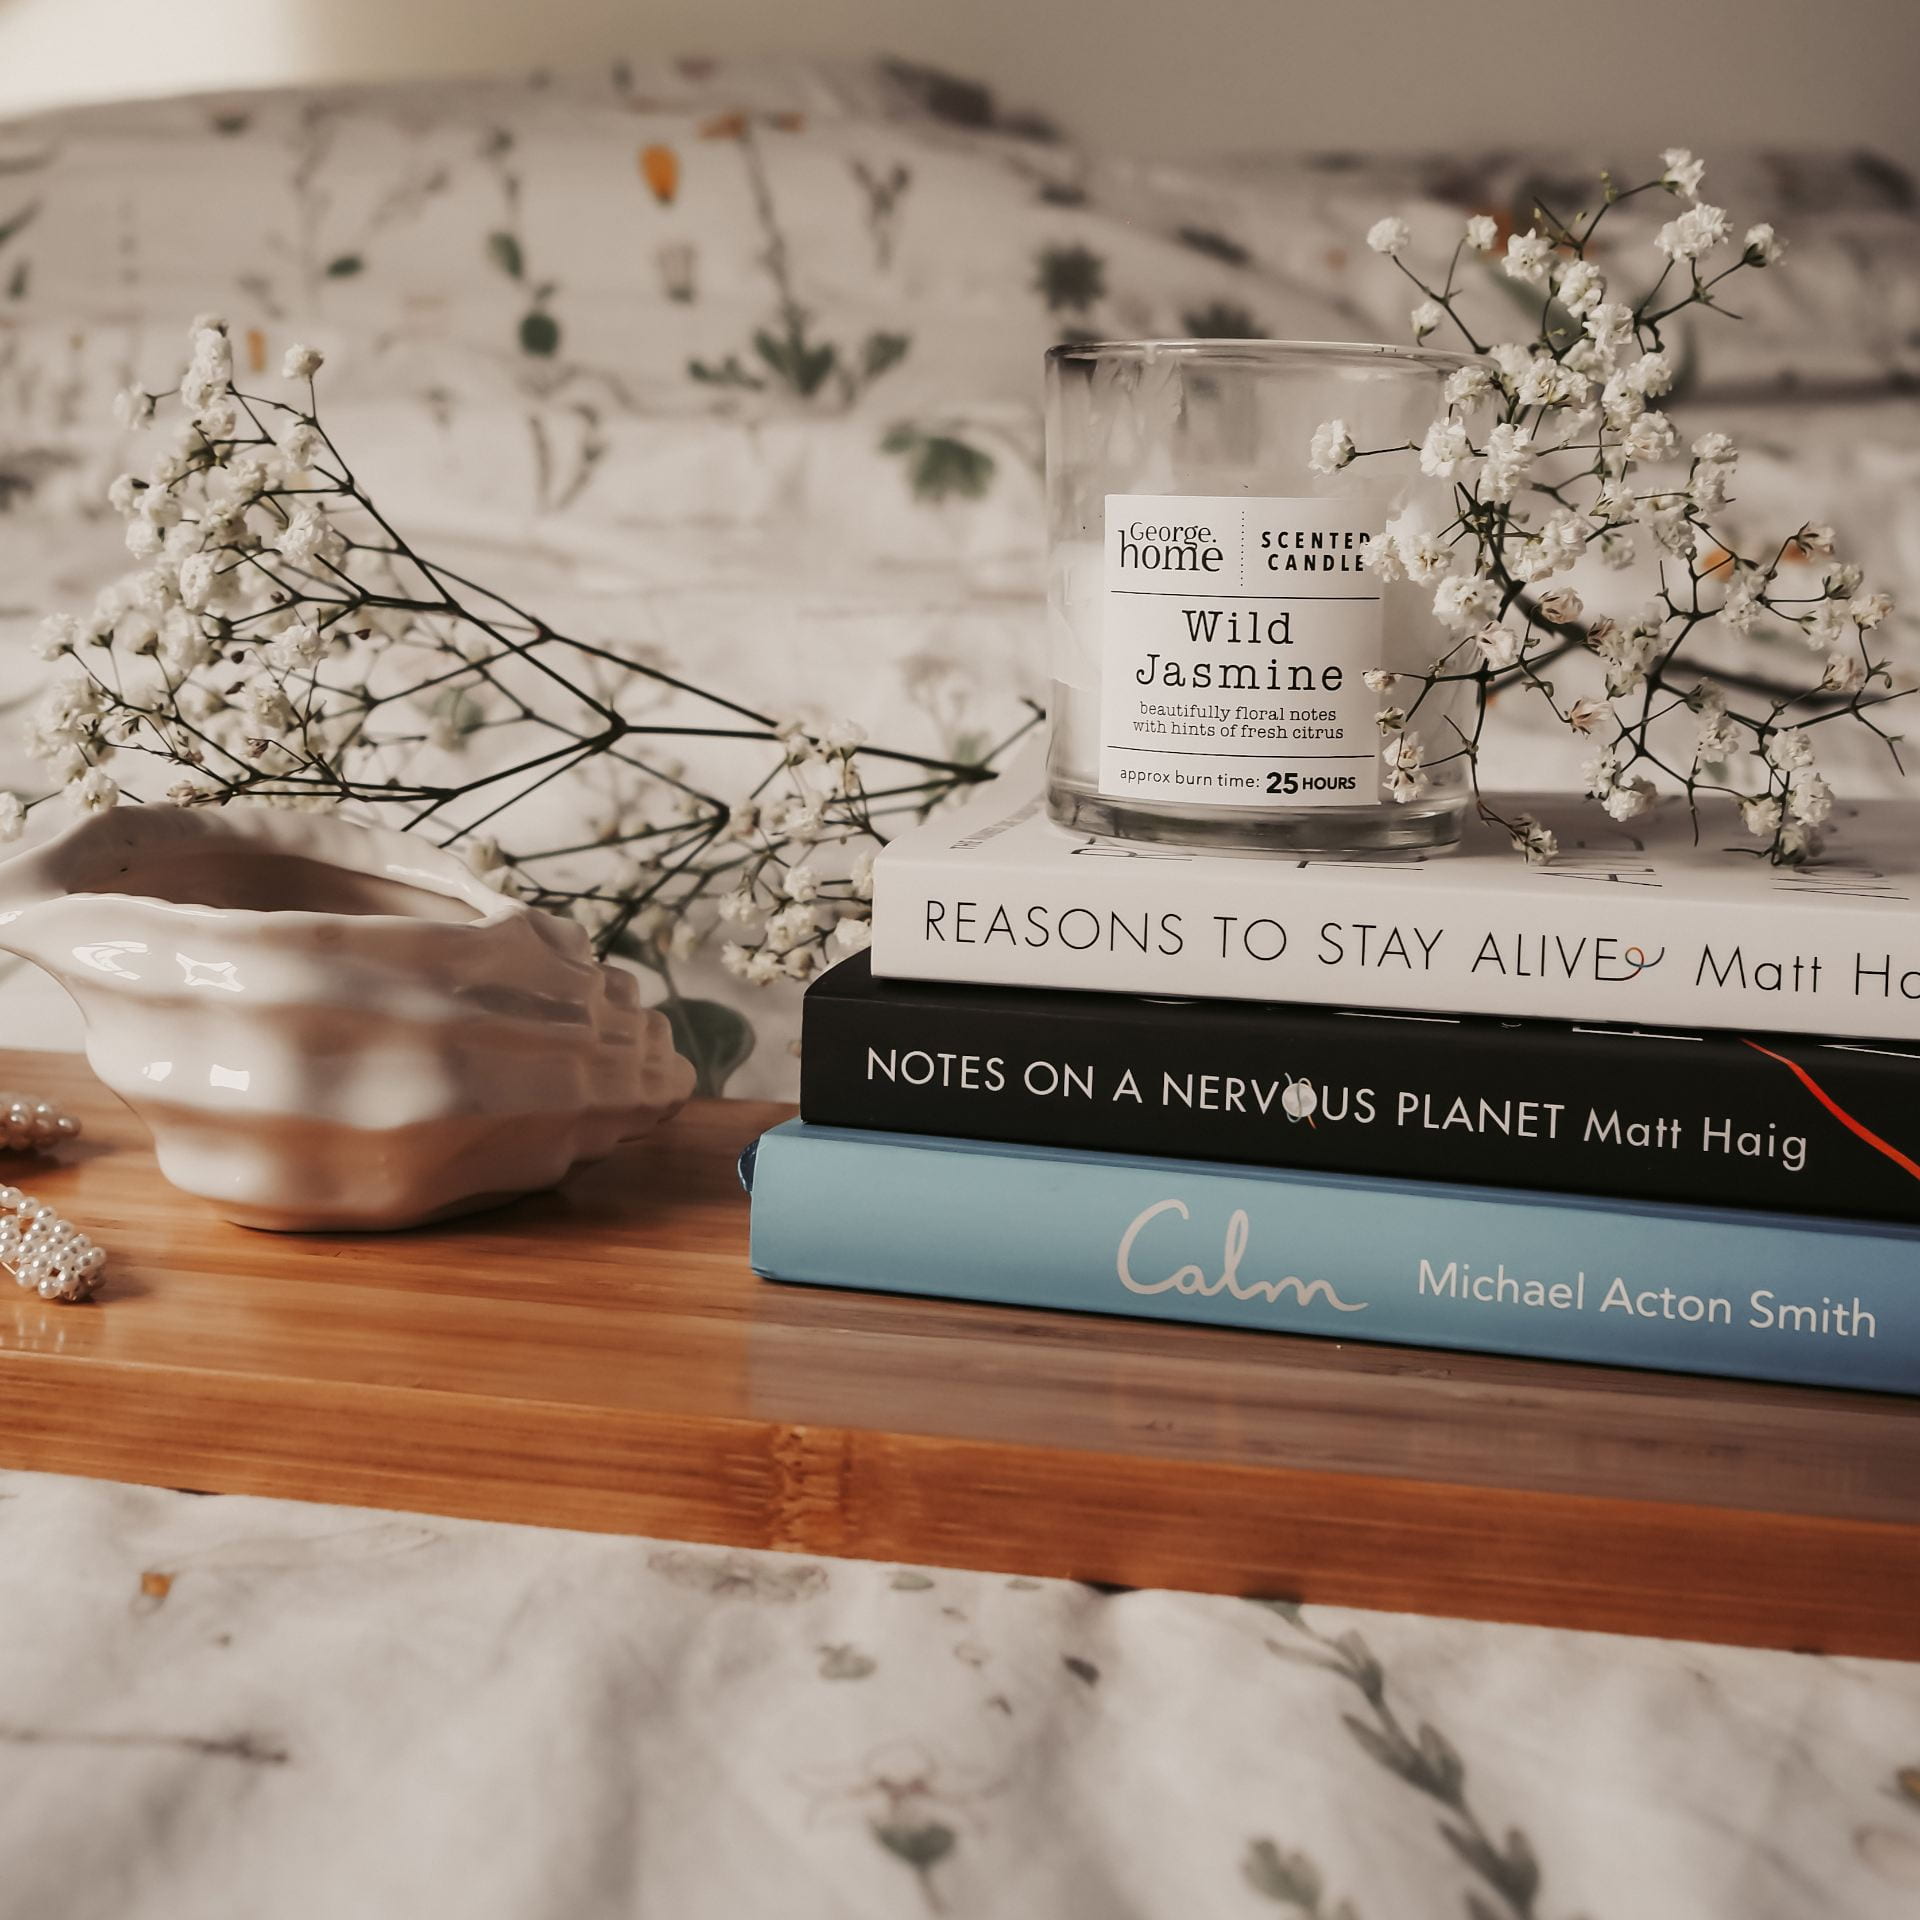 Pile of books, flowers and a candle